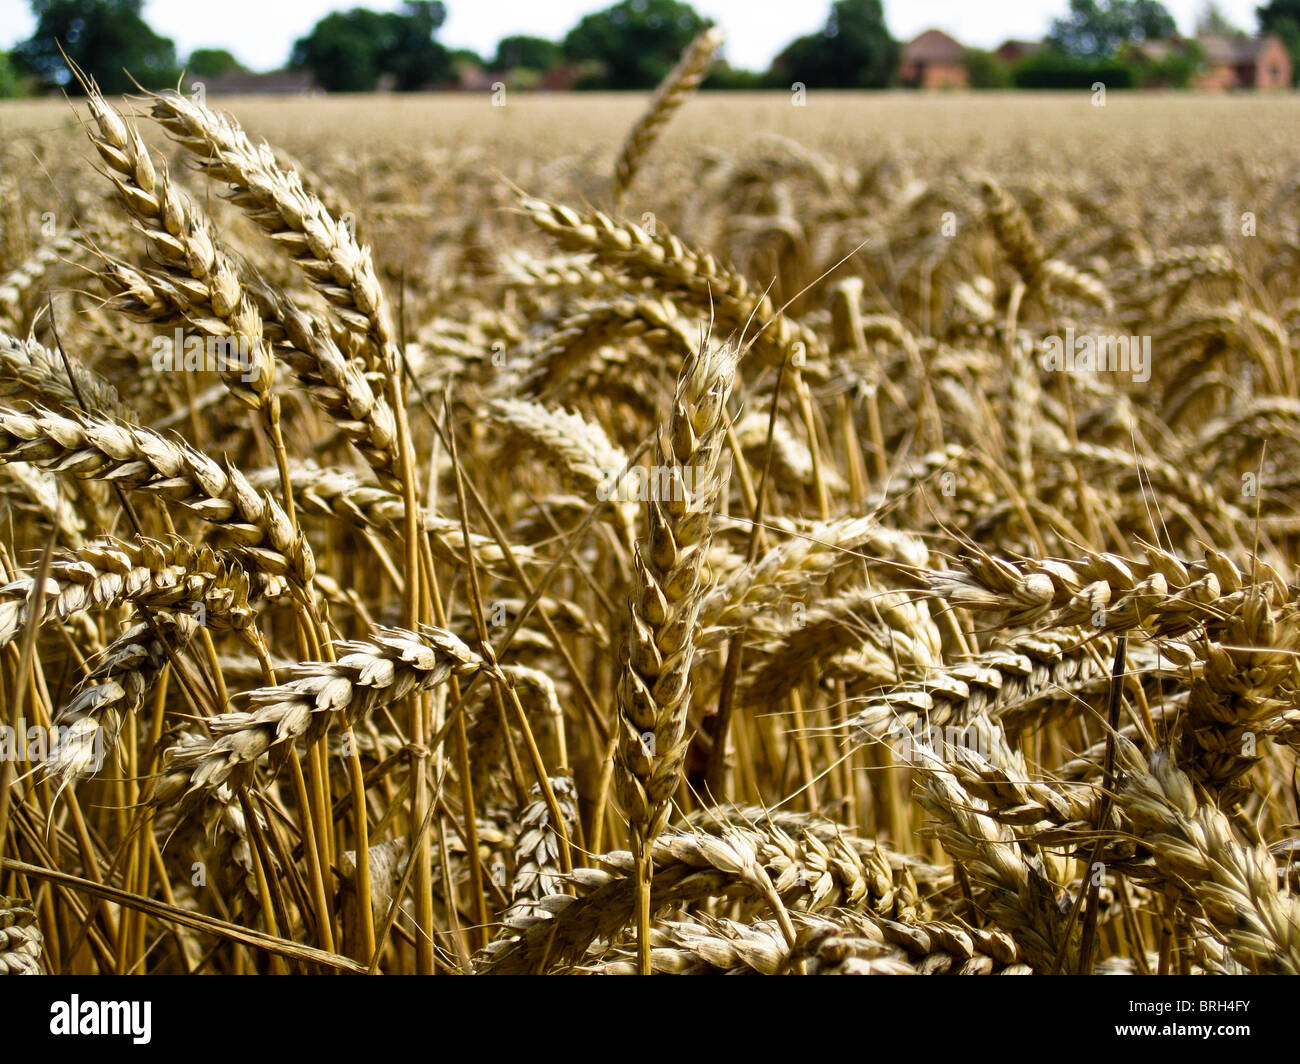 Many heads of corn in field ready for harvesting Stock Photo